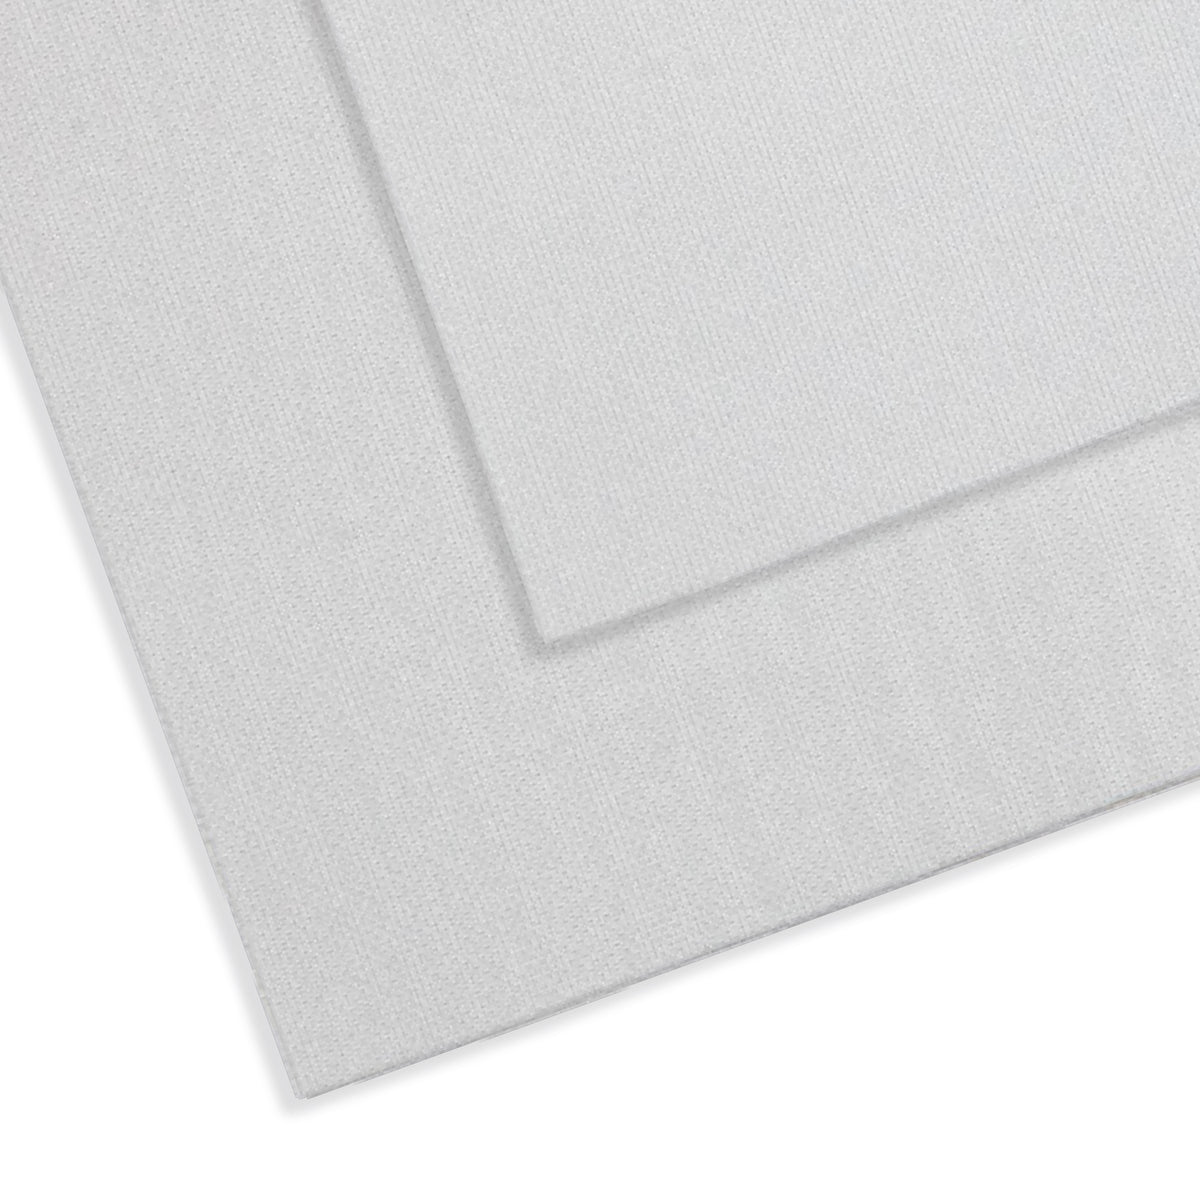 Reinraum-Tuch FG Purity Wipe 7225 | Polyester, ISO 4, 30 x 30 cm